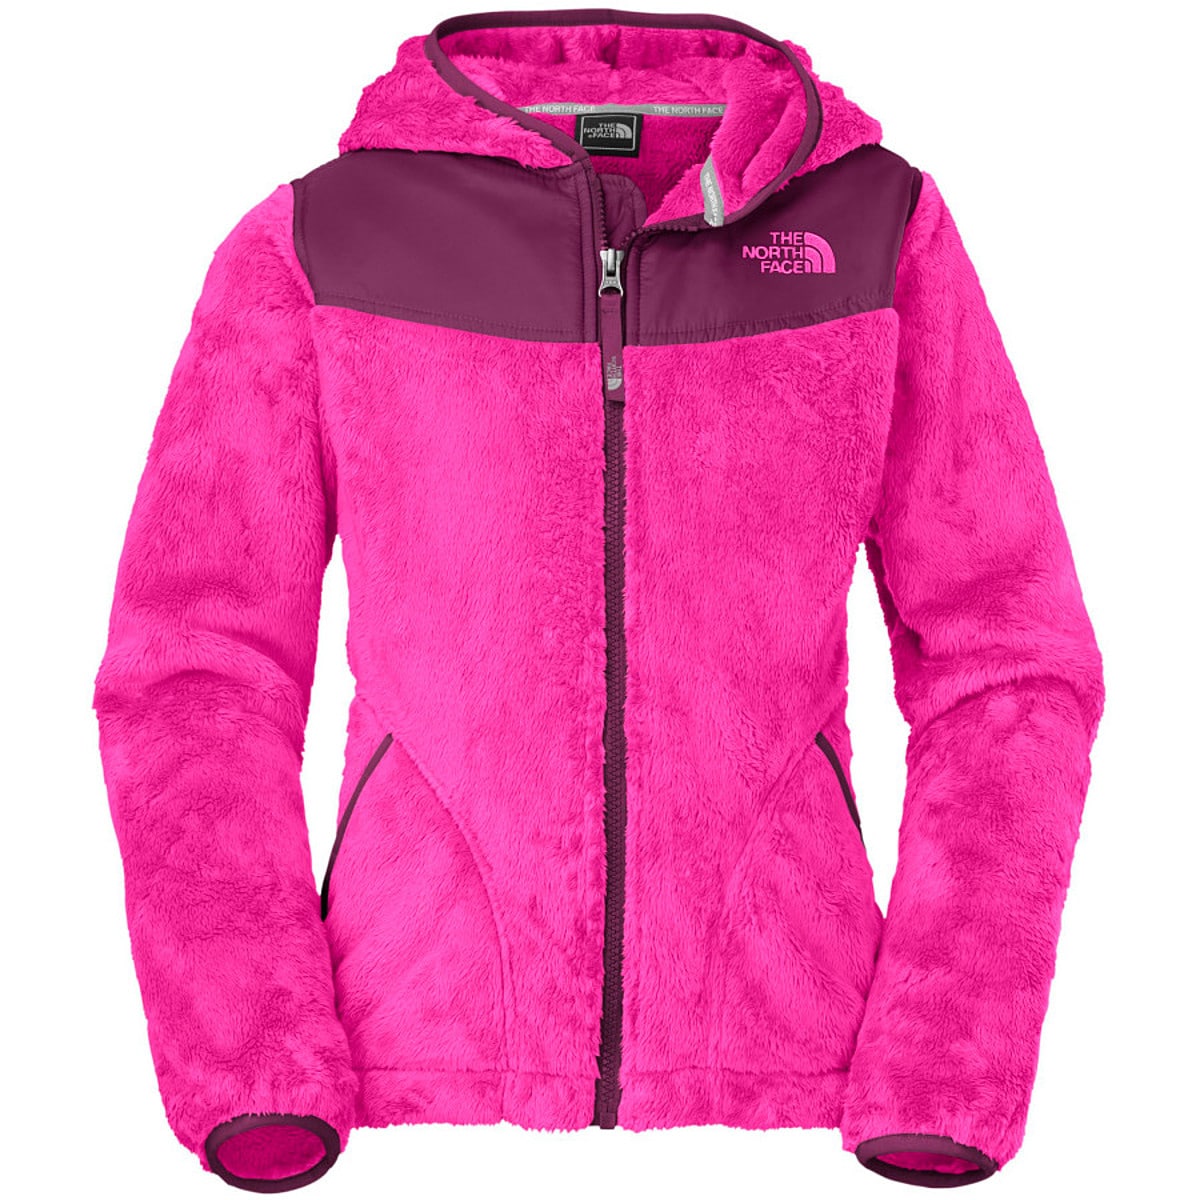 The North Face Oso Hooded Fleece Jacket - Girls' - Kids